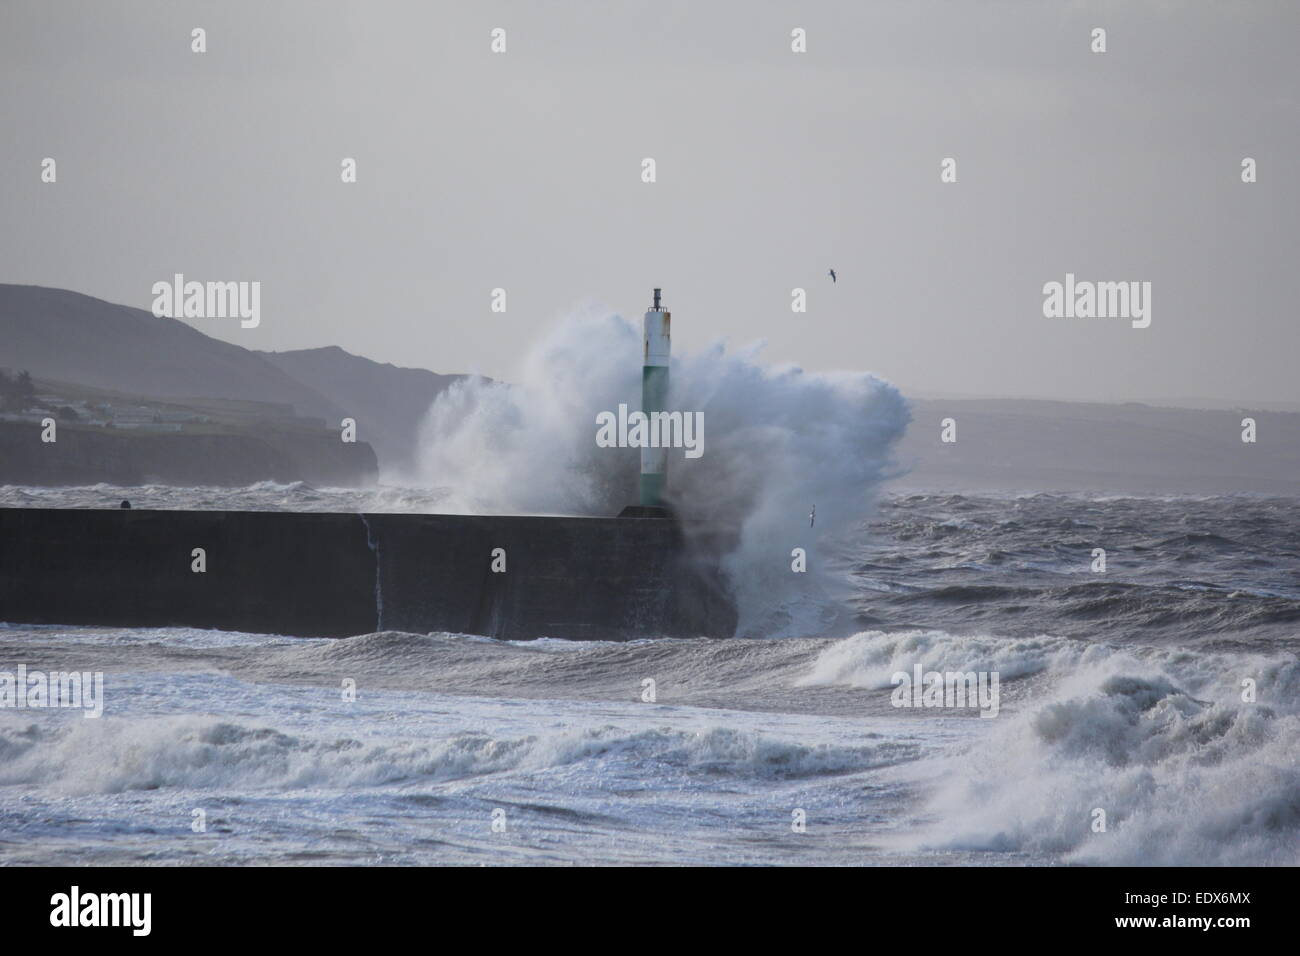 Aberystwyth west Wales UK.. Gale force winds & angry seas batter the coastline. Stock Photo